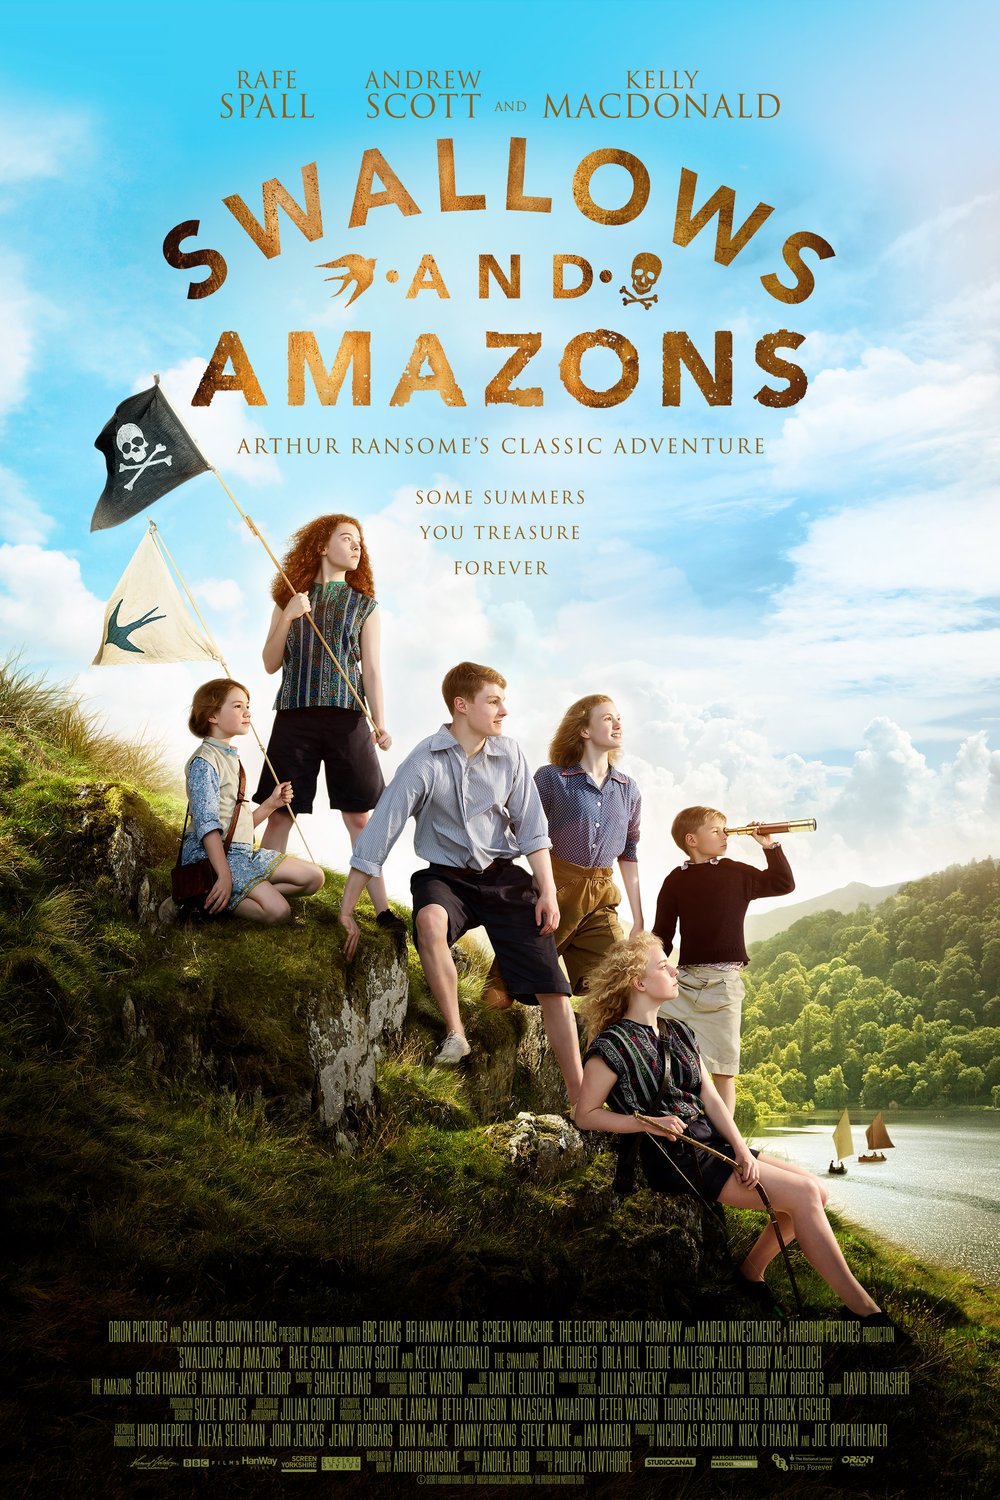 L'affiche du film Swallows and Amazons